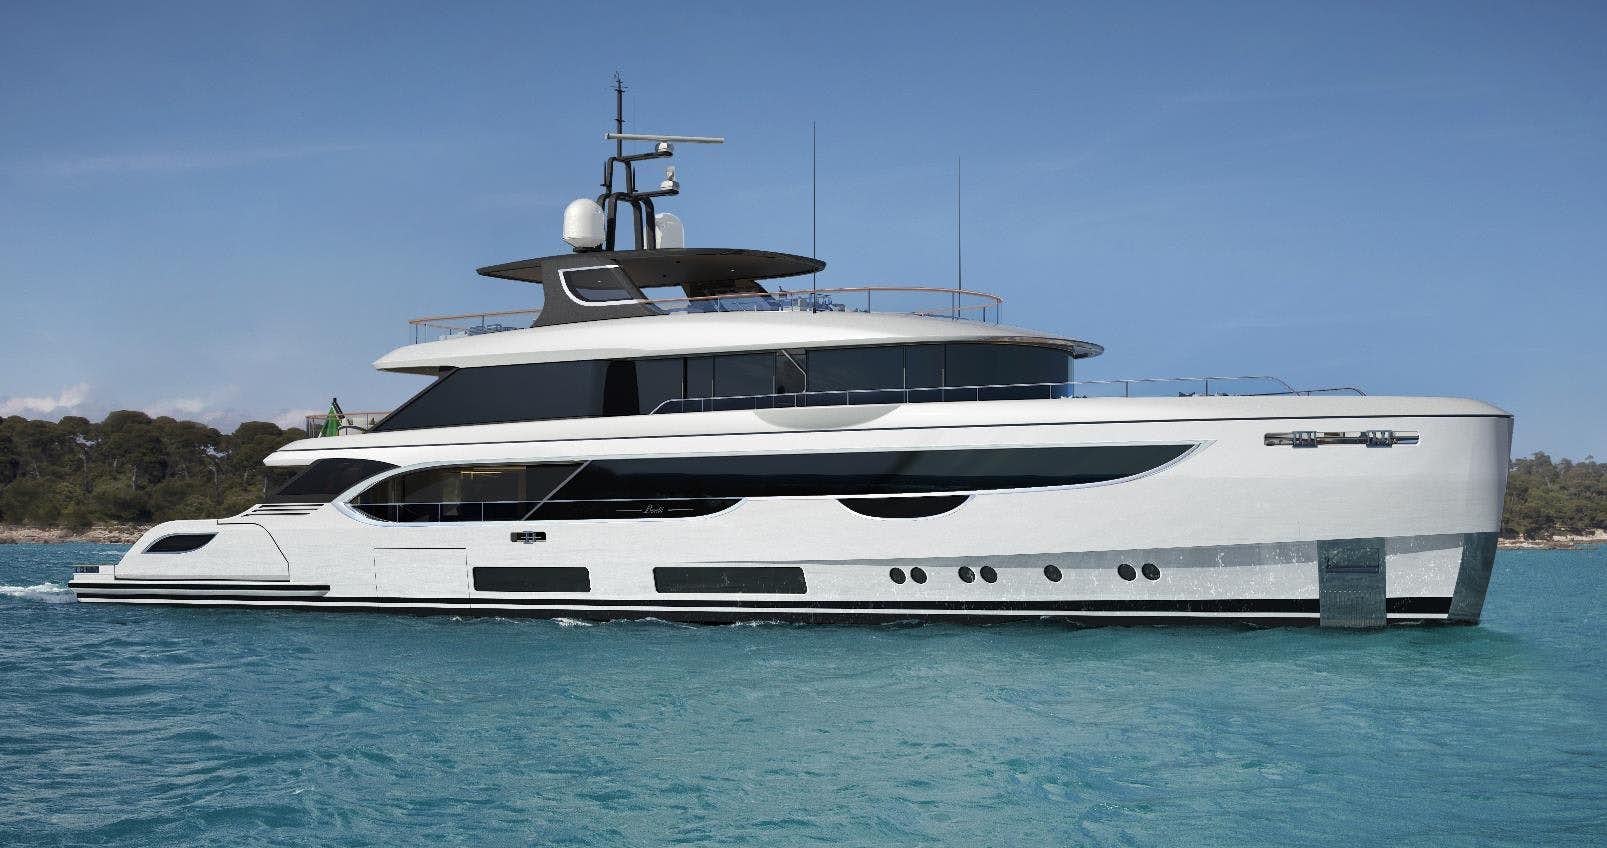 Charter superyacht ALPHA WAVES with Northrop & Johnson for 150k/week